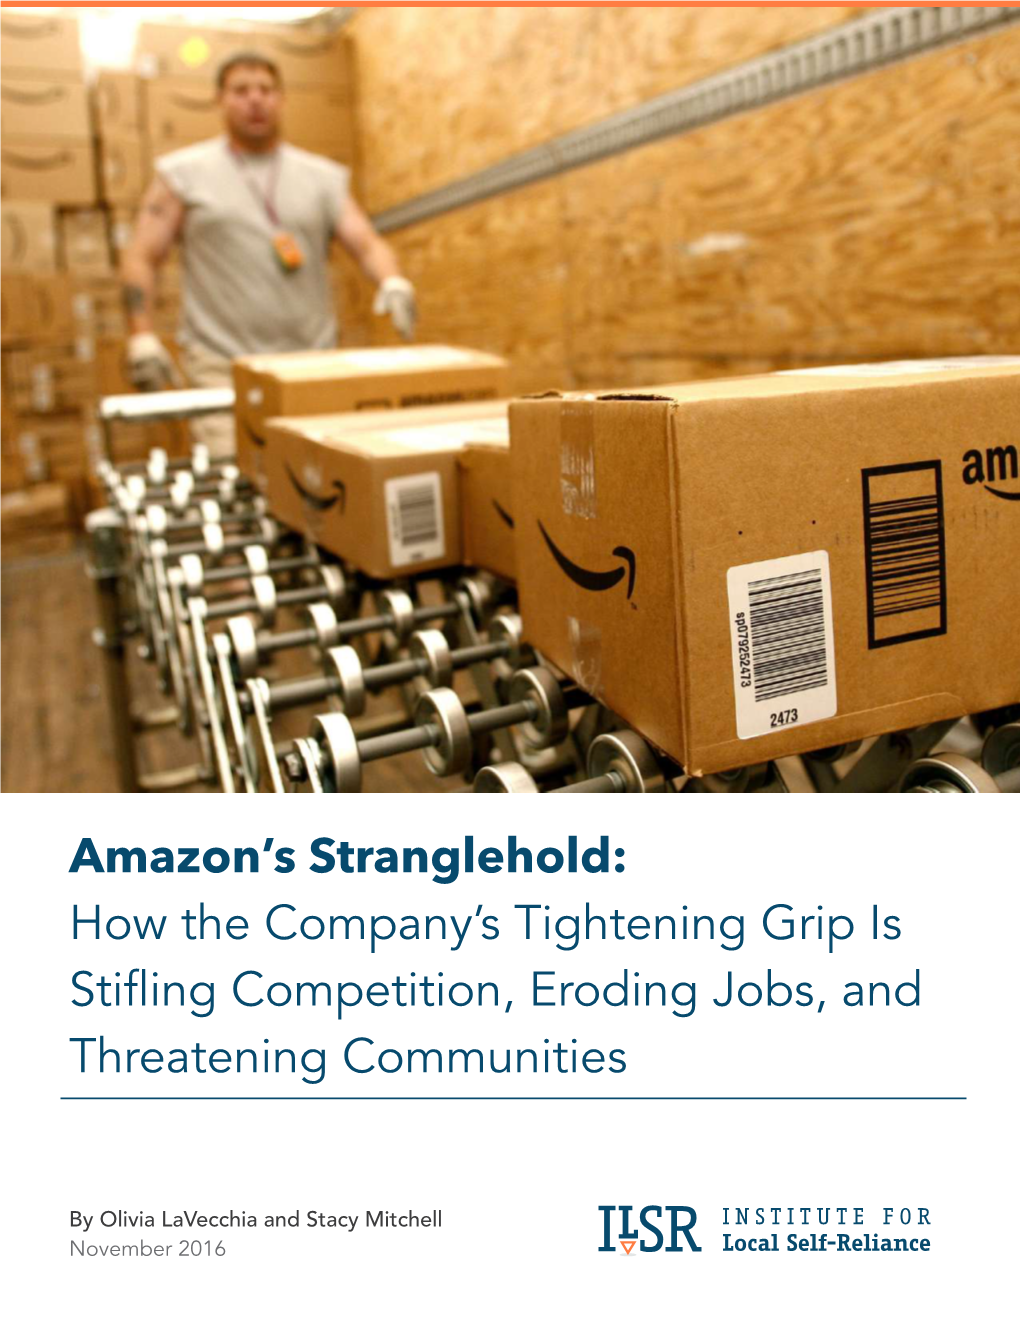 Amazon's Stranglehold: How the Company's Tightening Grip Is Stifling Competition, Eroding Jobs, and Threatening Communities